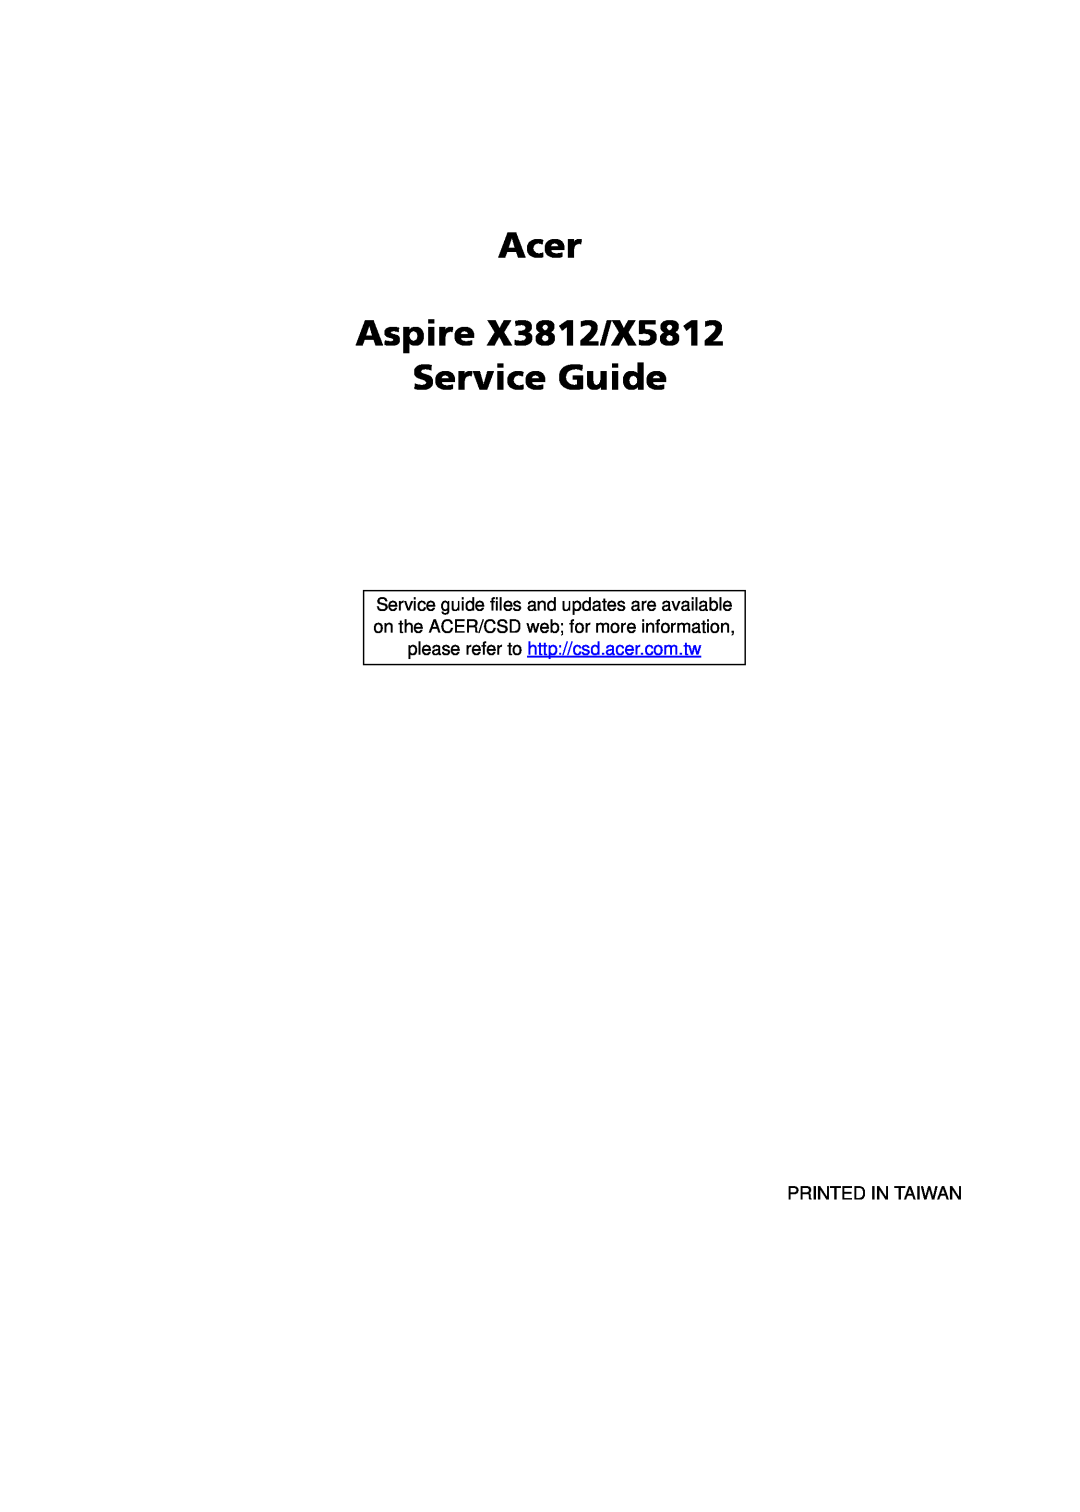 Acer manual Acer Aspire X3812/X5812 Service Guide, Printed In Taiwan 